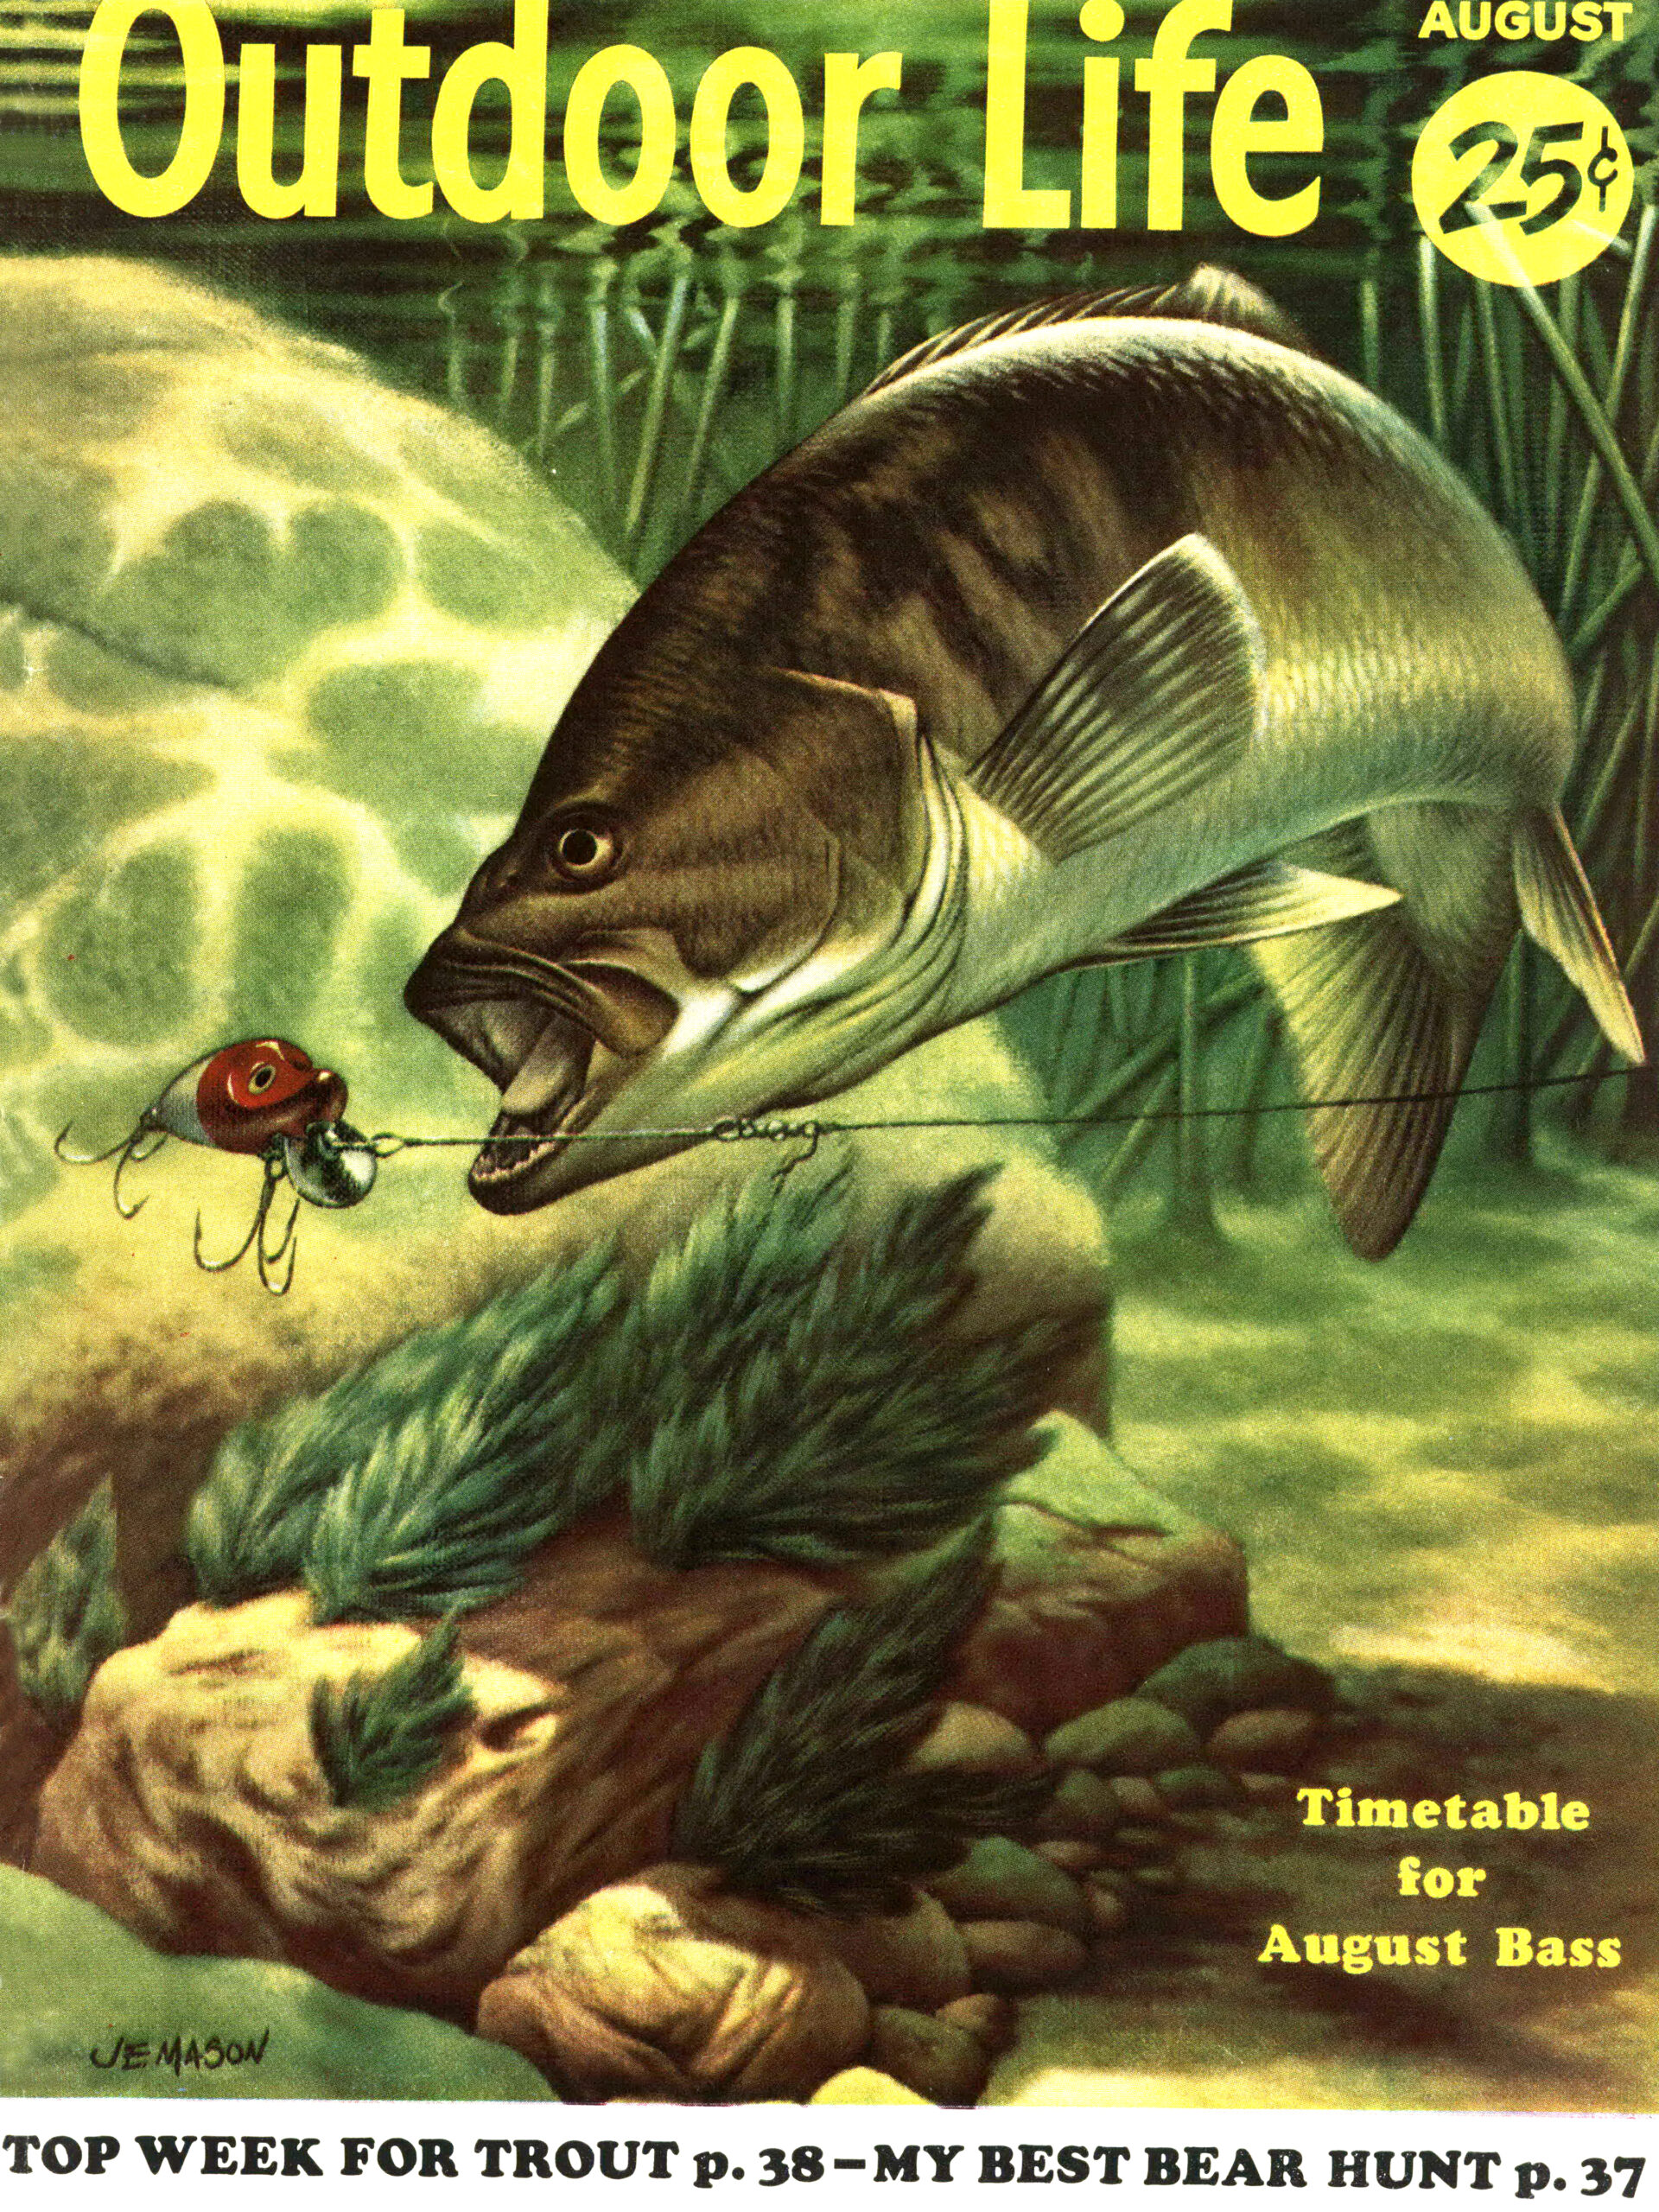 magazine cover shows fish taking lure